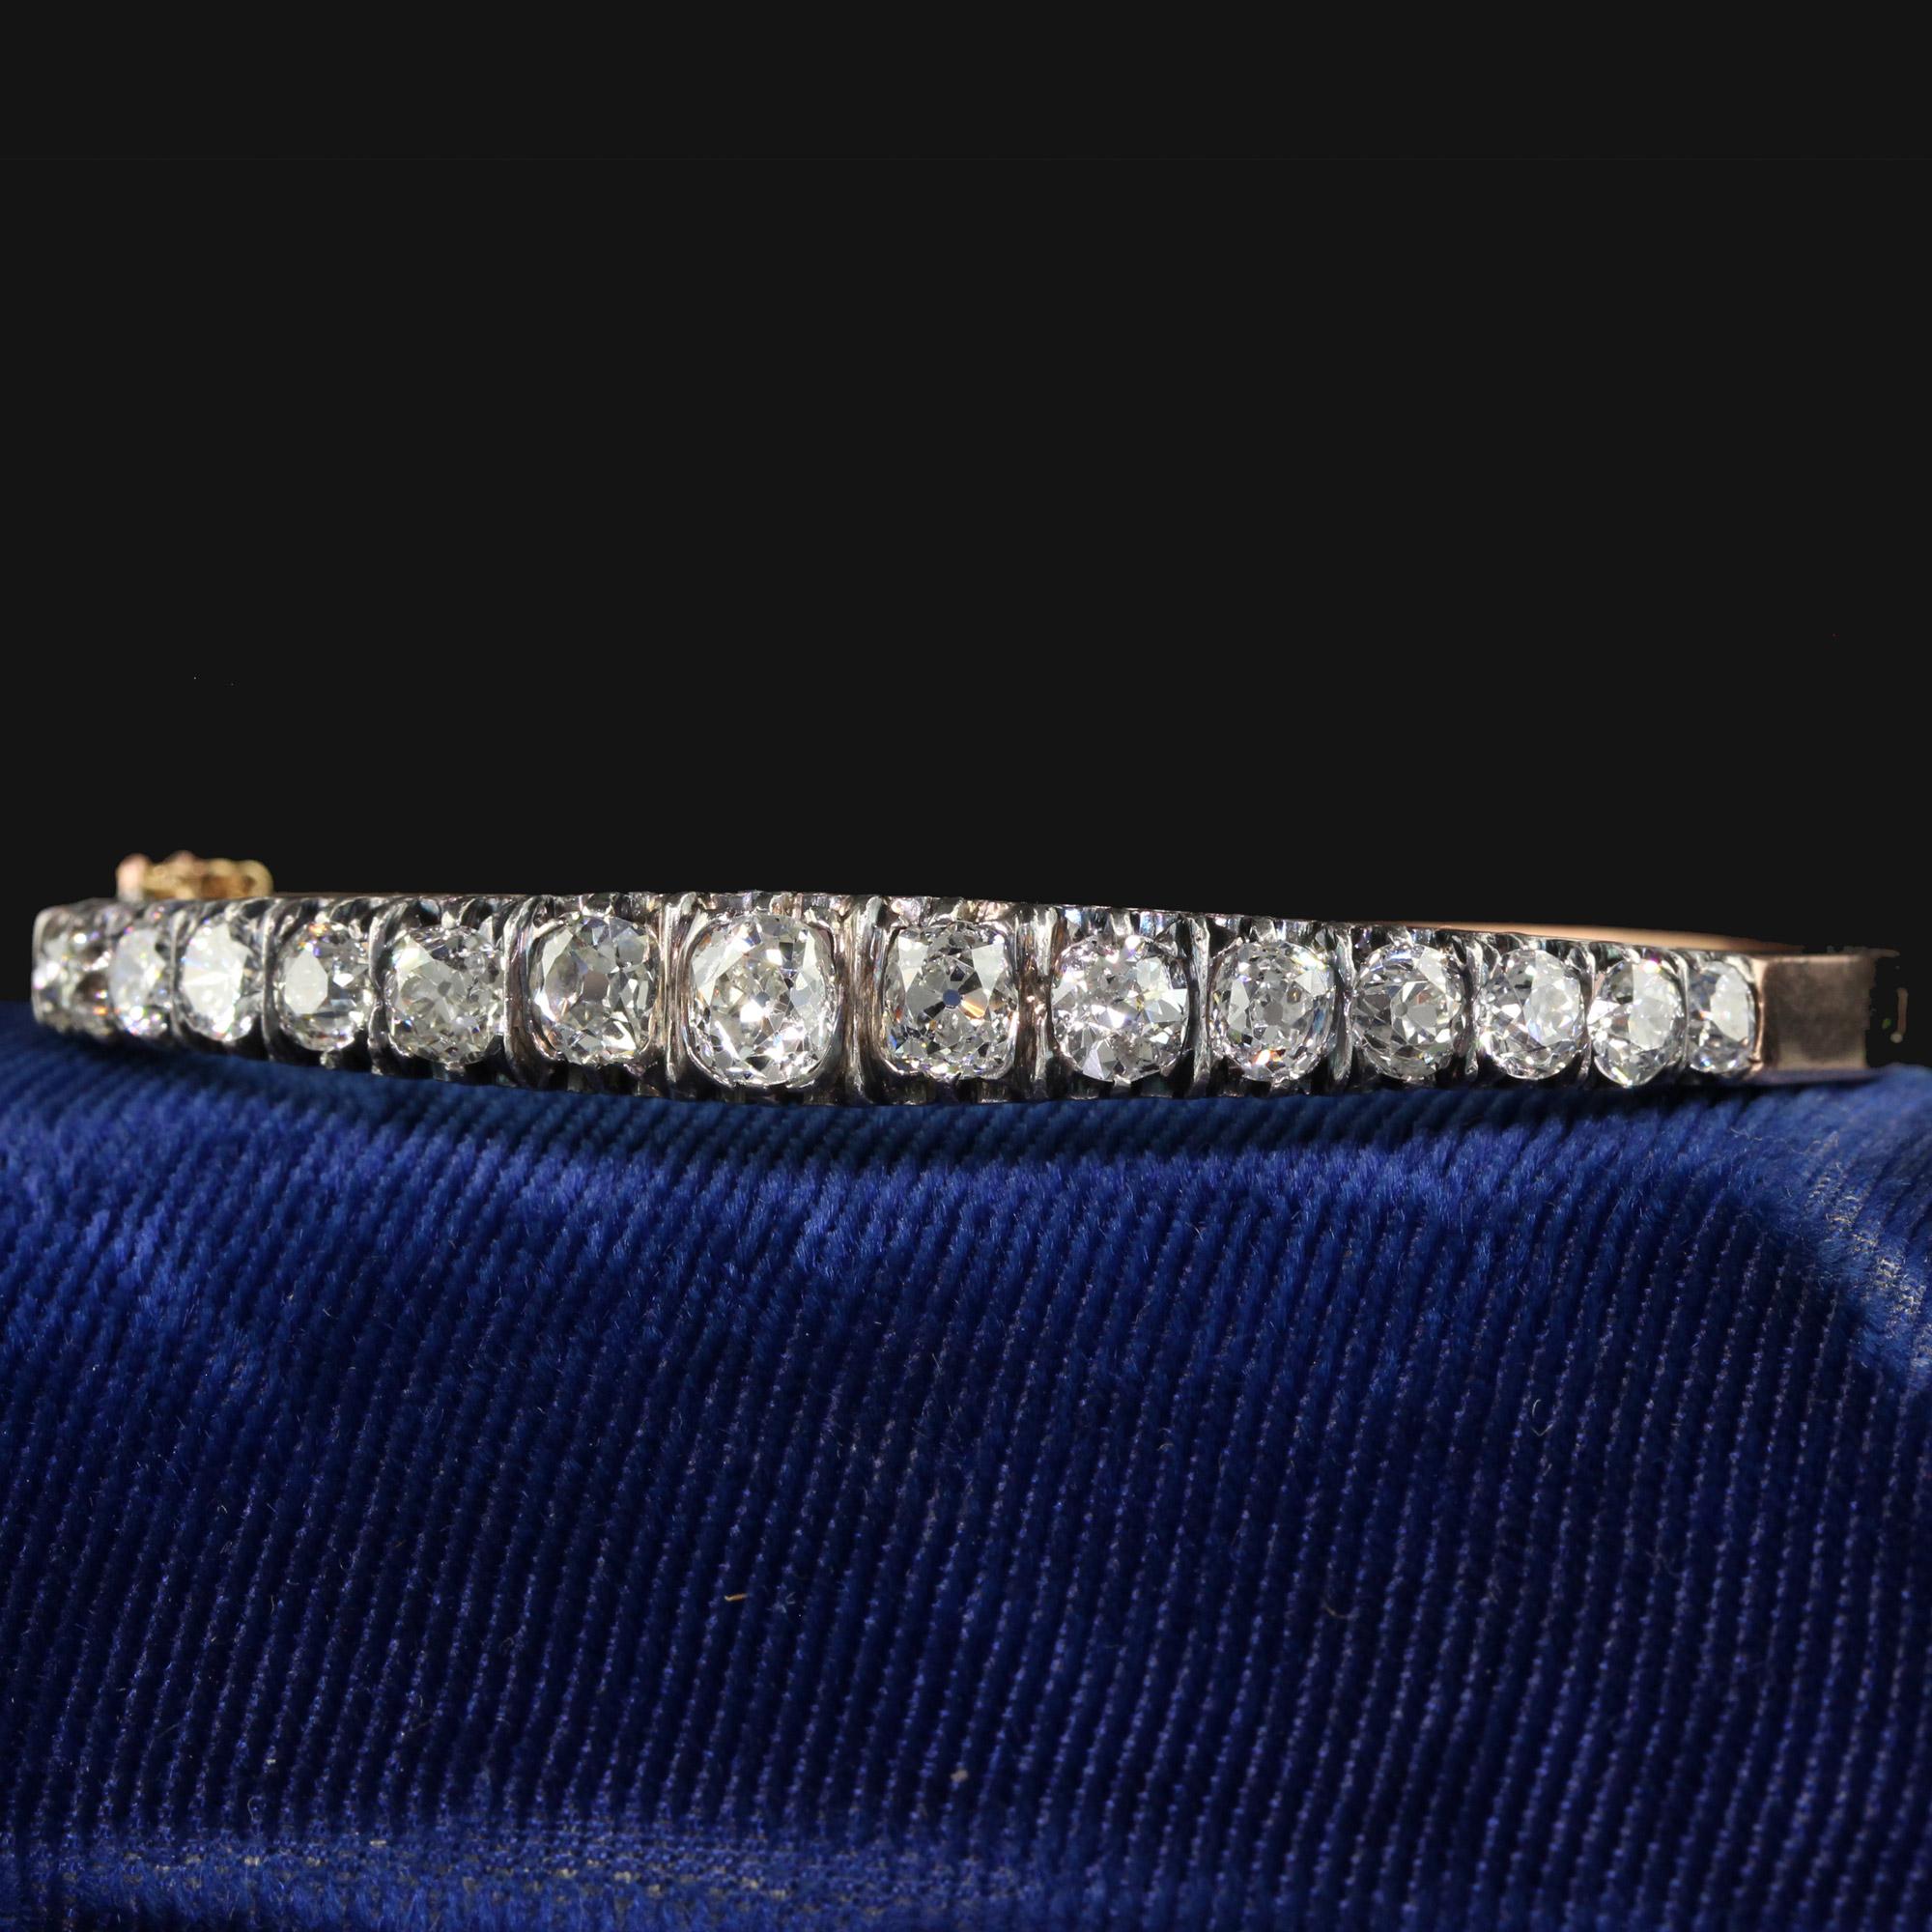 Beautiful Antique Victorian French 18K Yellow Gold Old Mine Diamond Line Bangle Bracelet. This incredible Victorian old mine diamond line bracelet is crafted in 18k yellow gold and silver. The top of the bangle has graduated old mine cut diamonds